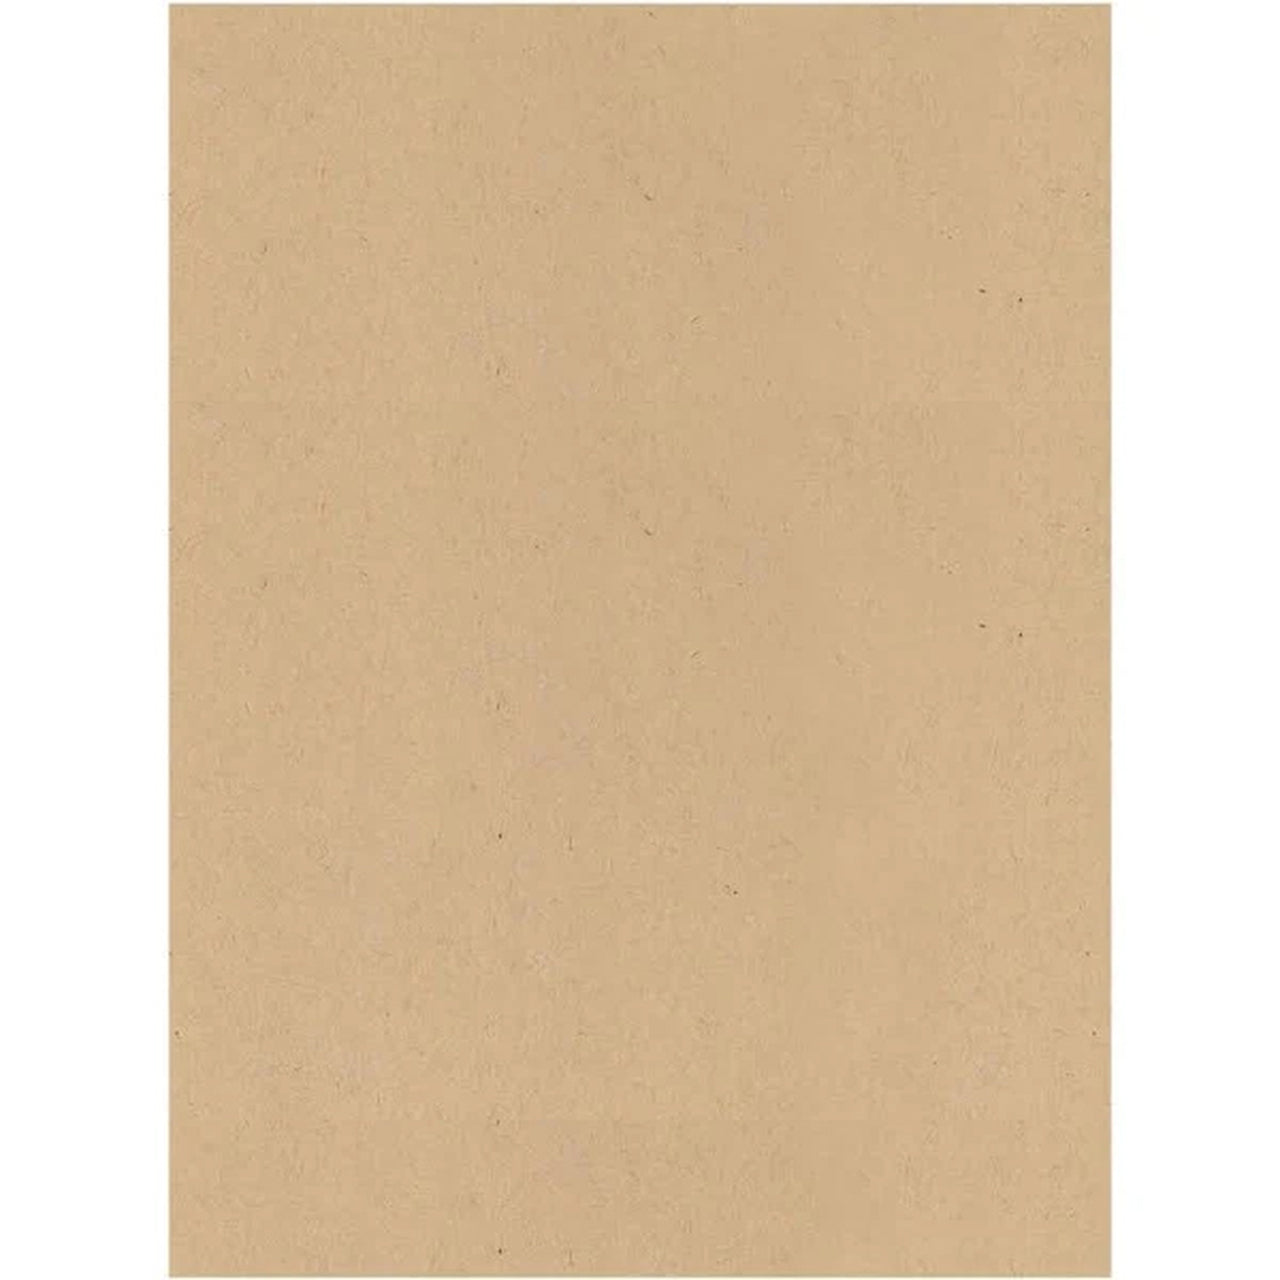 Kendal Manilla Buff A 4 size (8.27 x 11.69 in) cardstock - 25 sheets